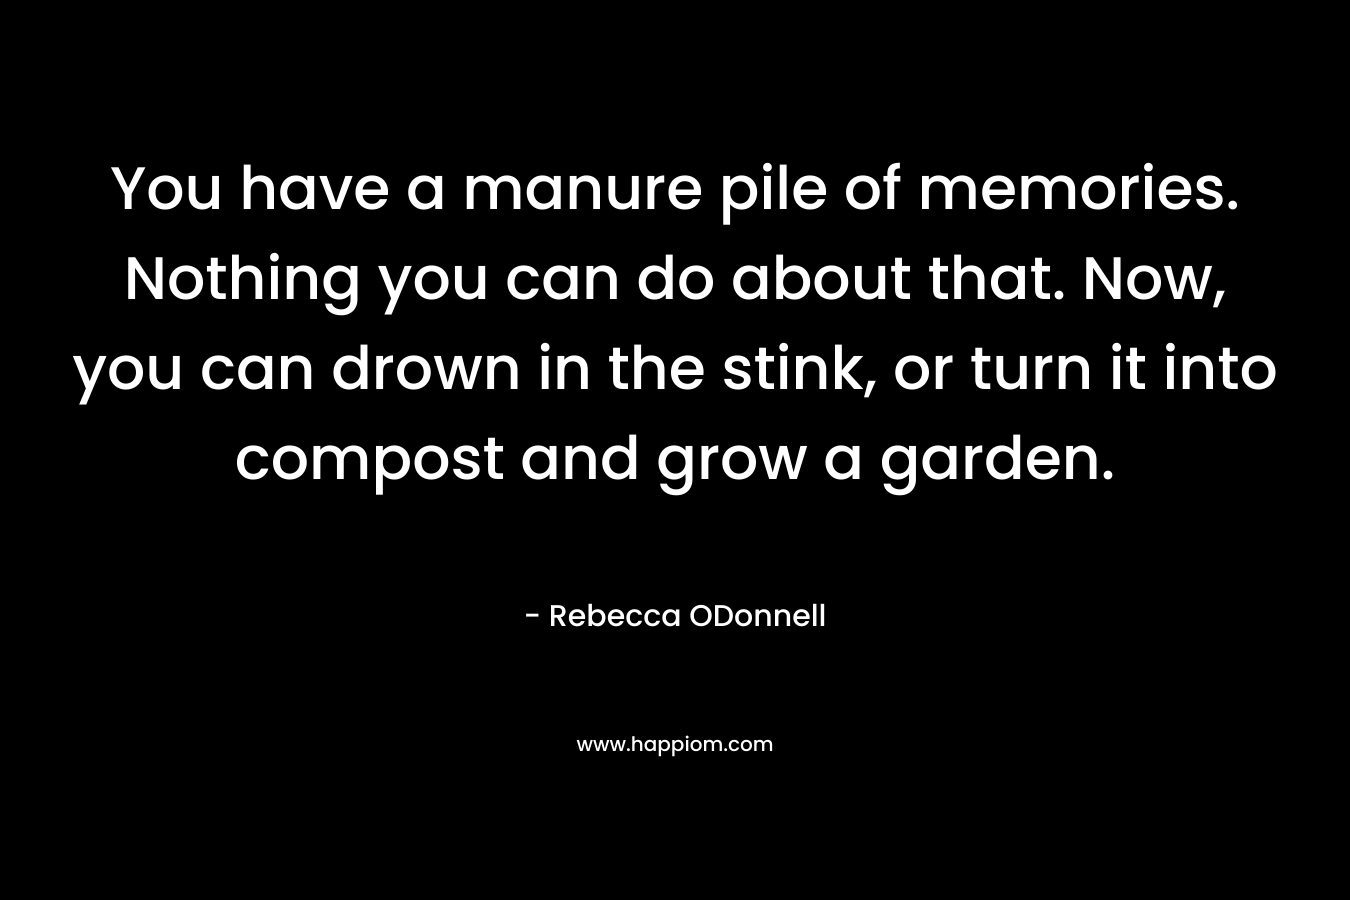 You have a manure pile of memories. Nothing you can do about that. Now, you can drown in the stink, or turn it into compost and grow a garden. – Rebecca ODonnell